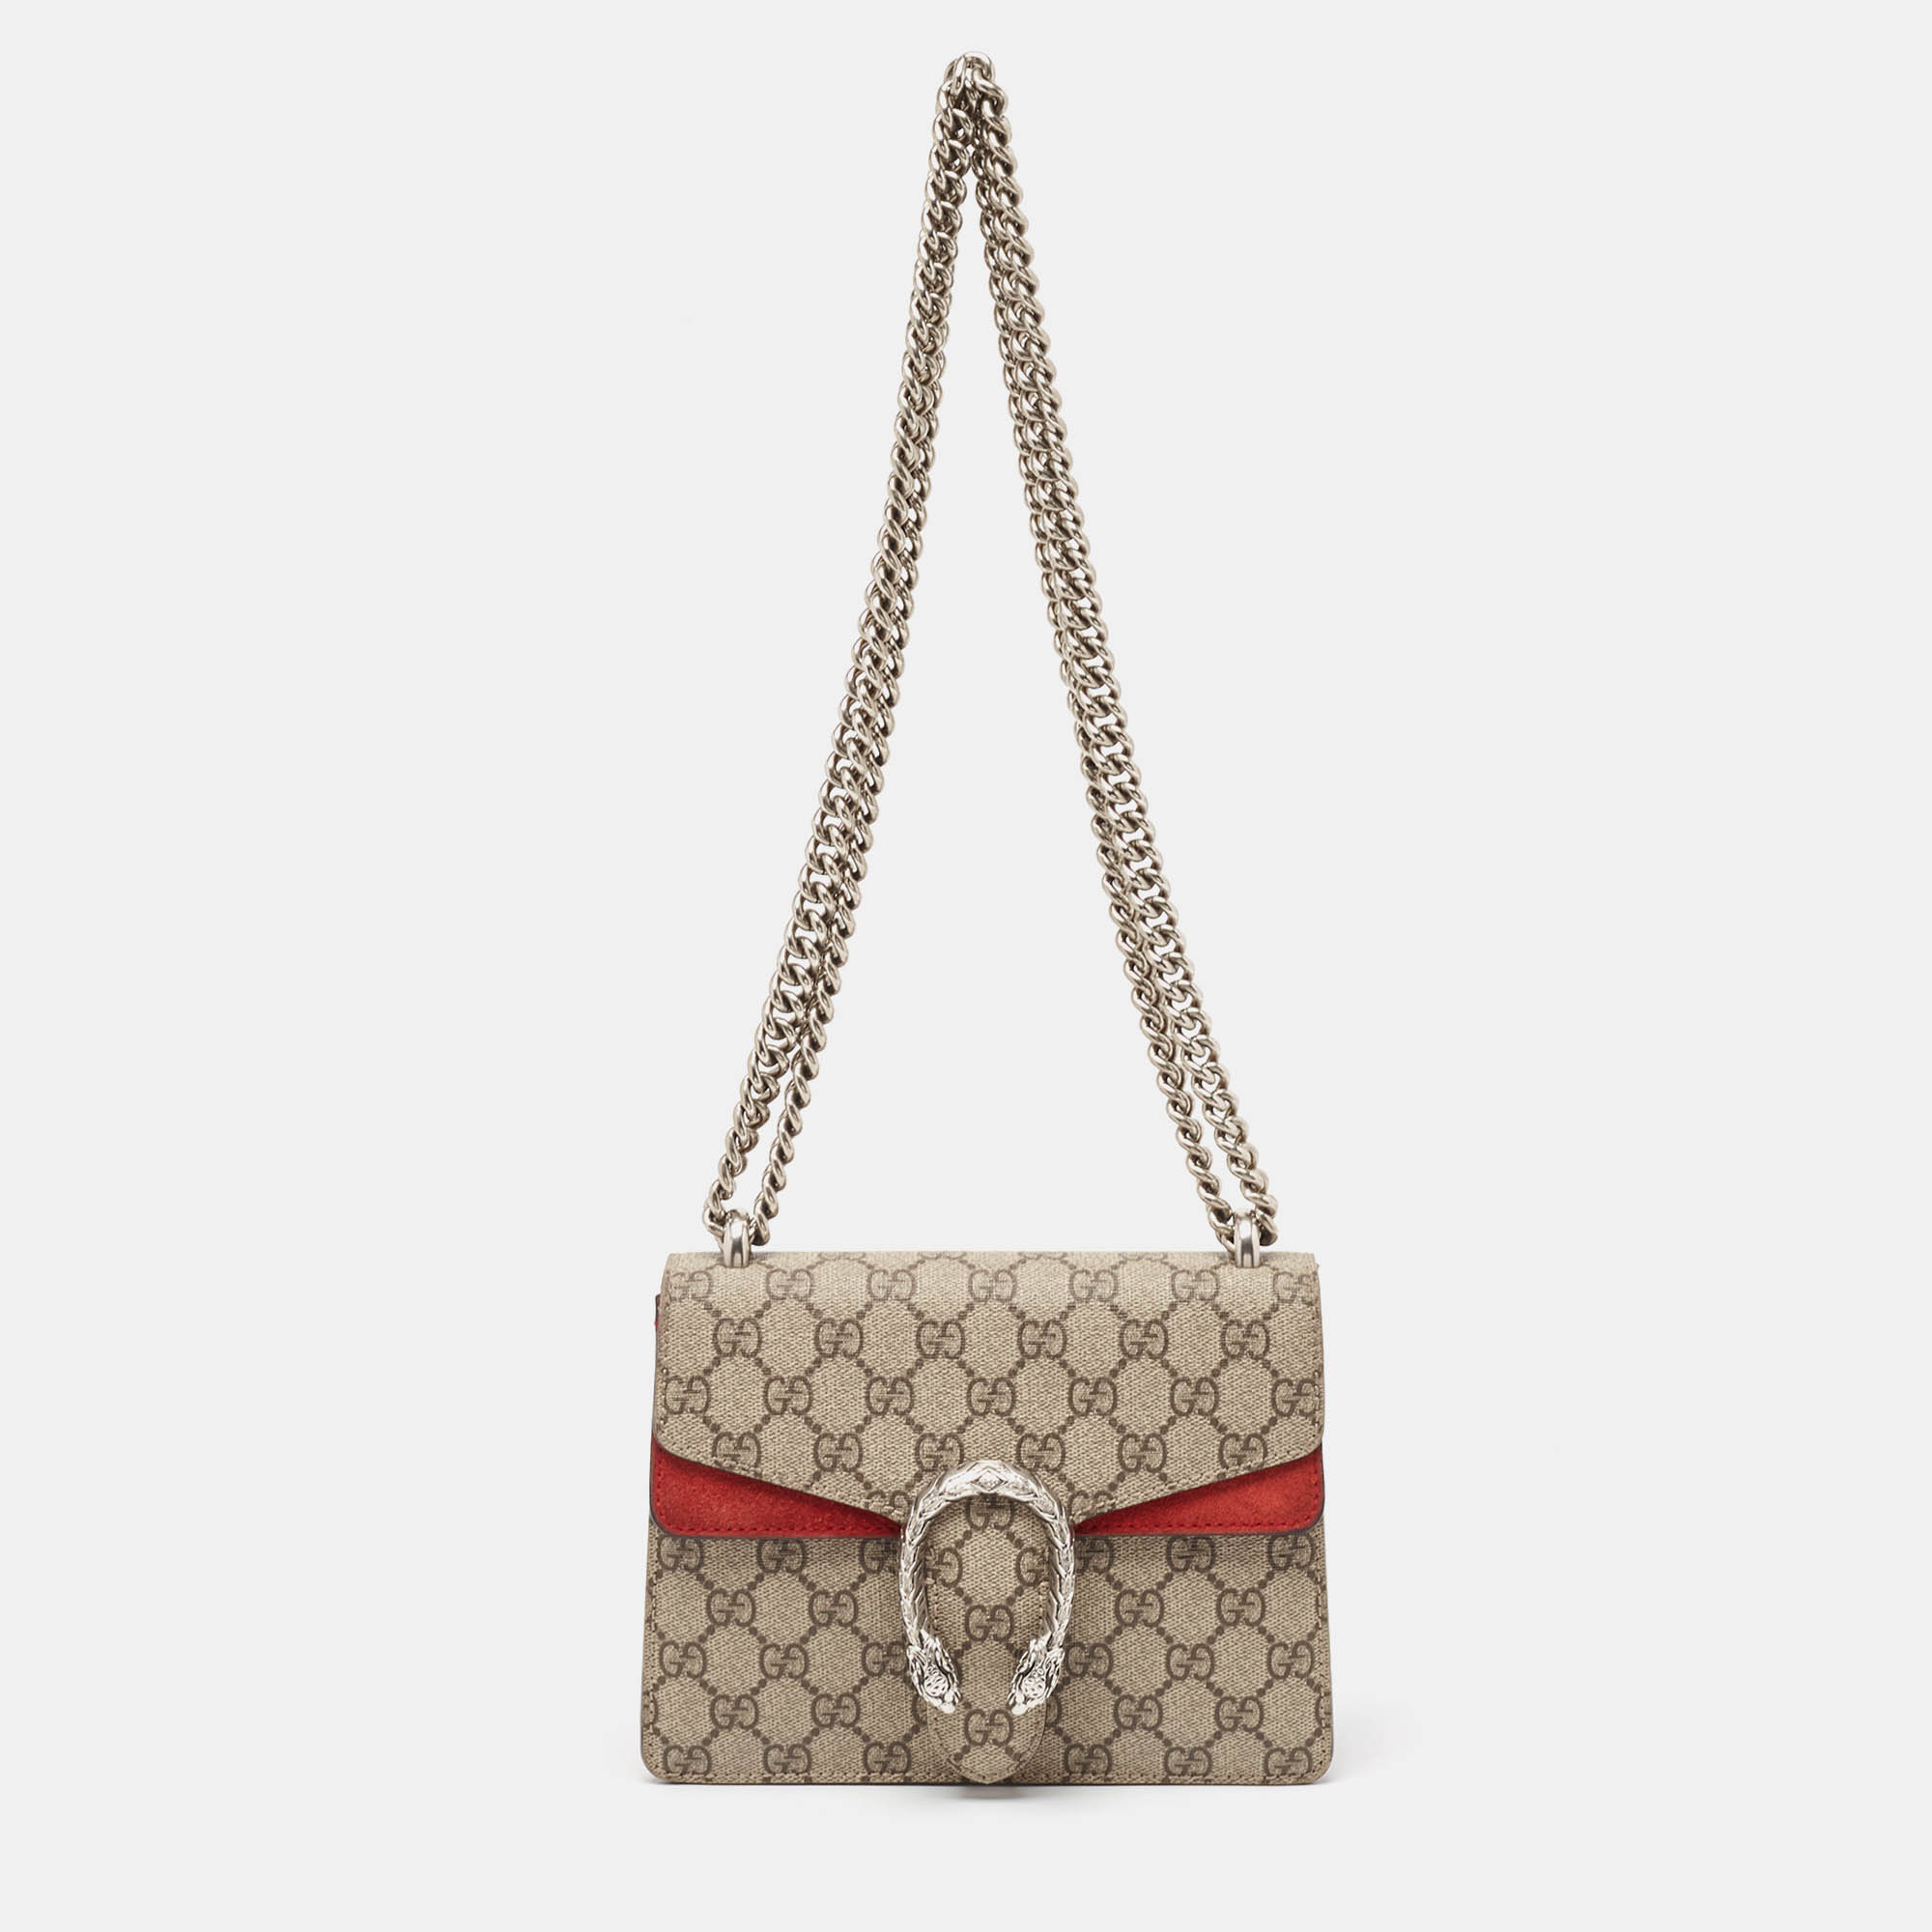 Gucci red/beige gg supreme canvas and suede mini dionysus shoulder bag